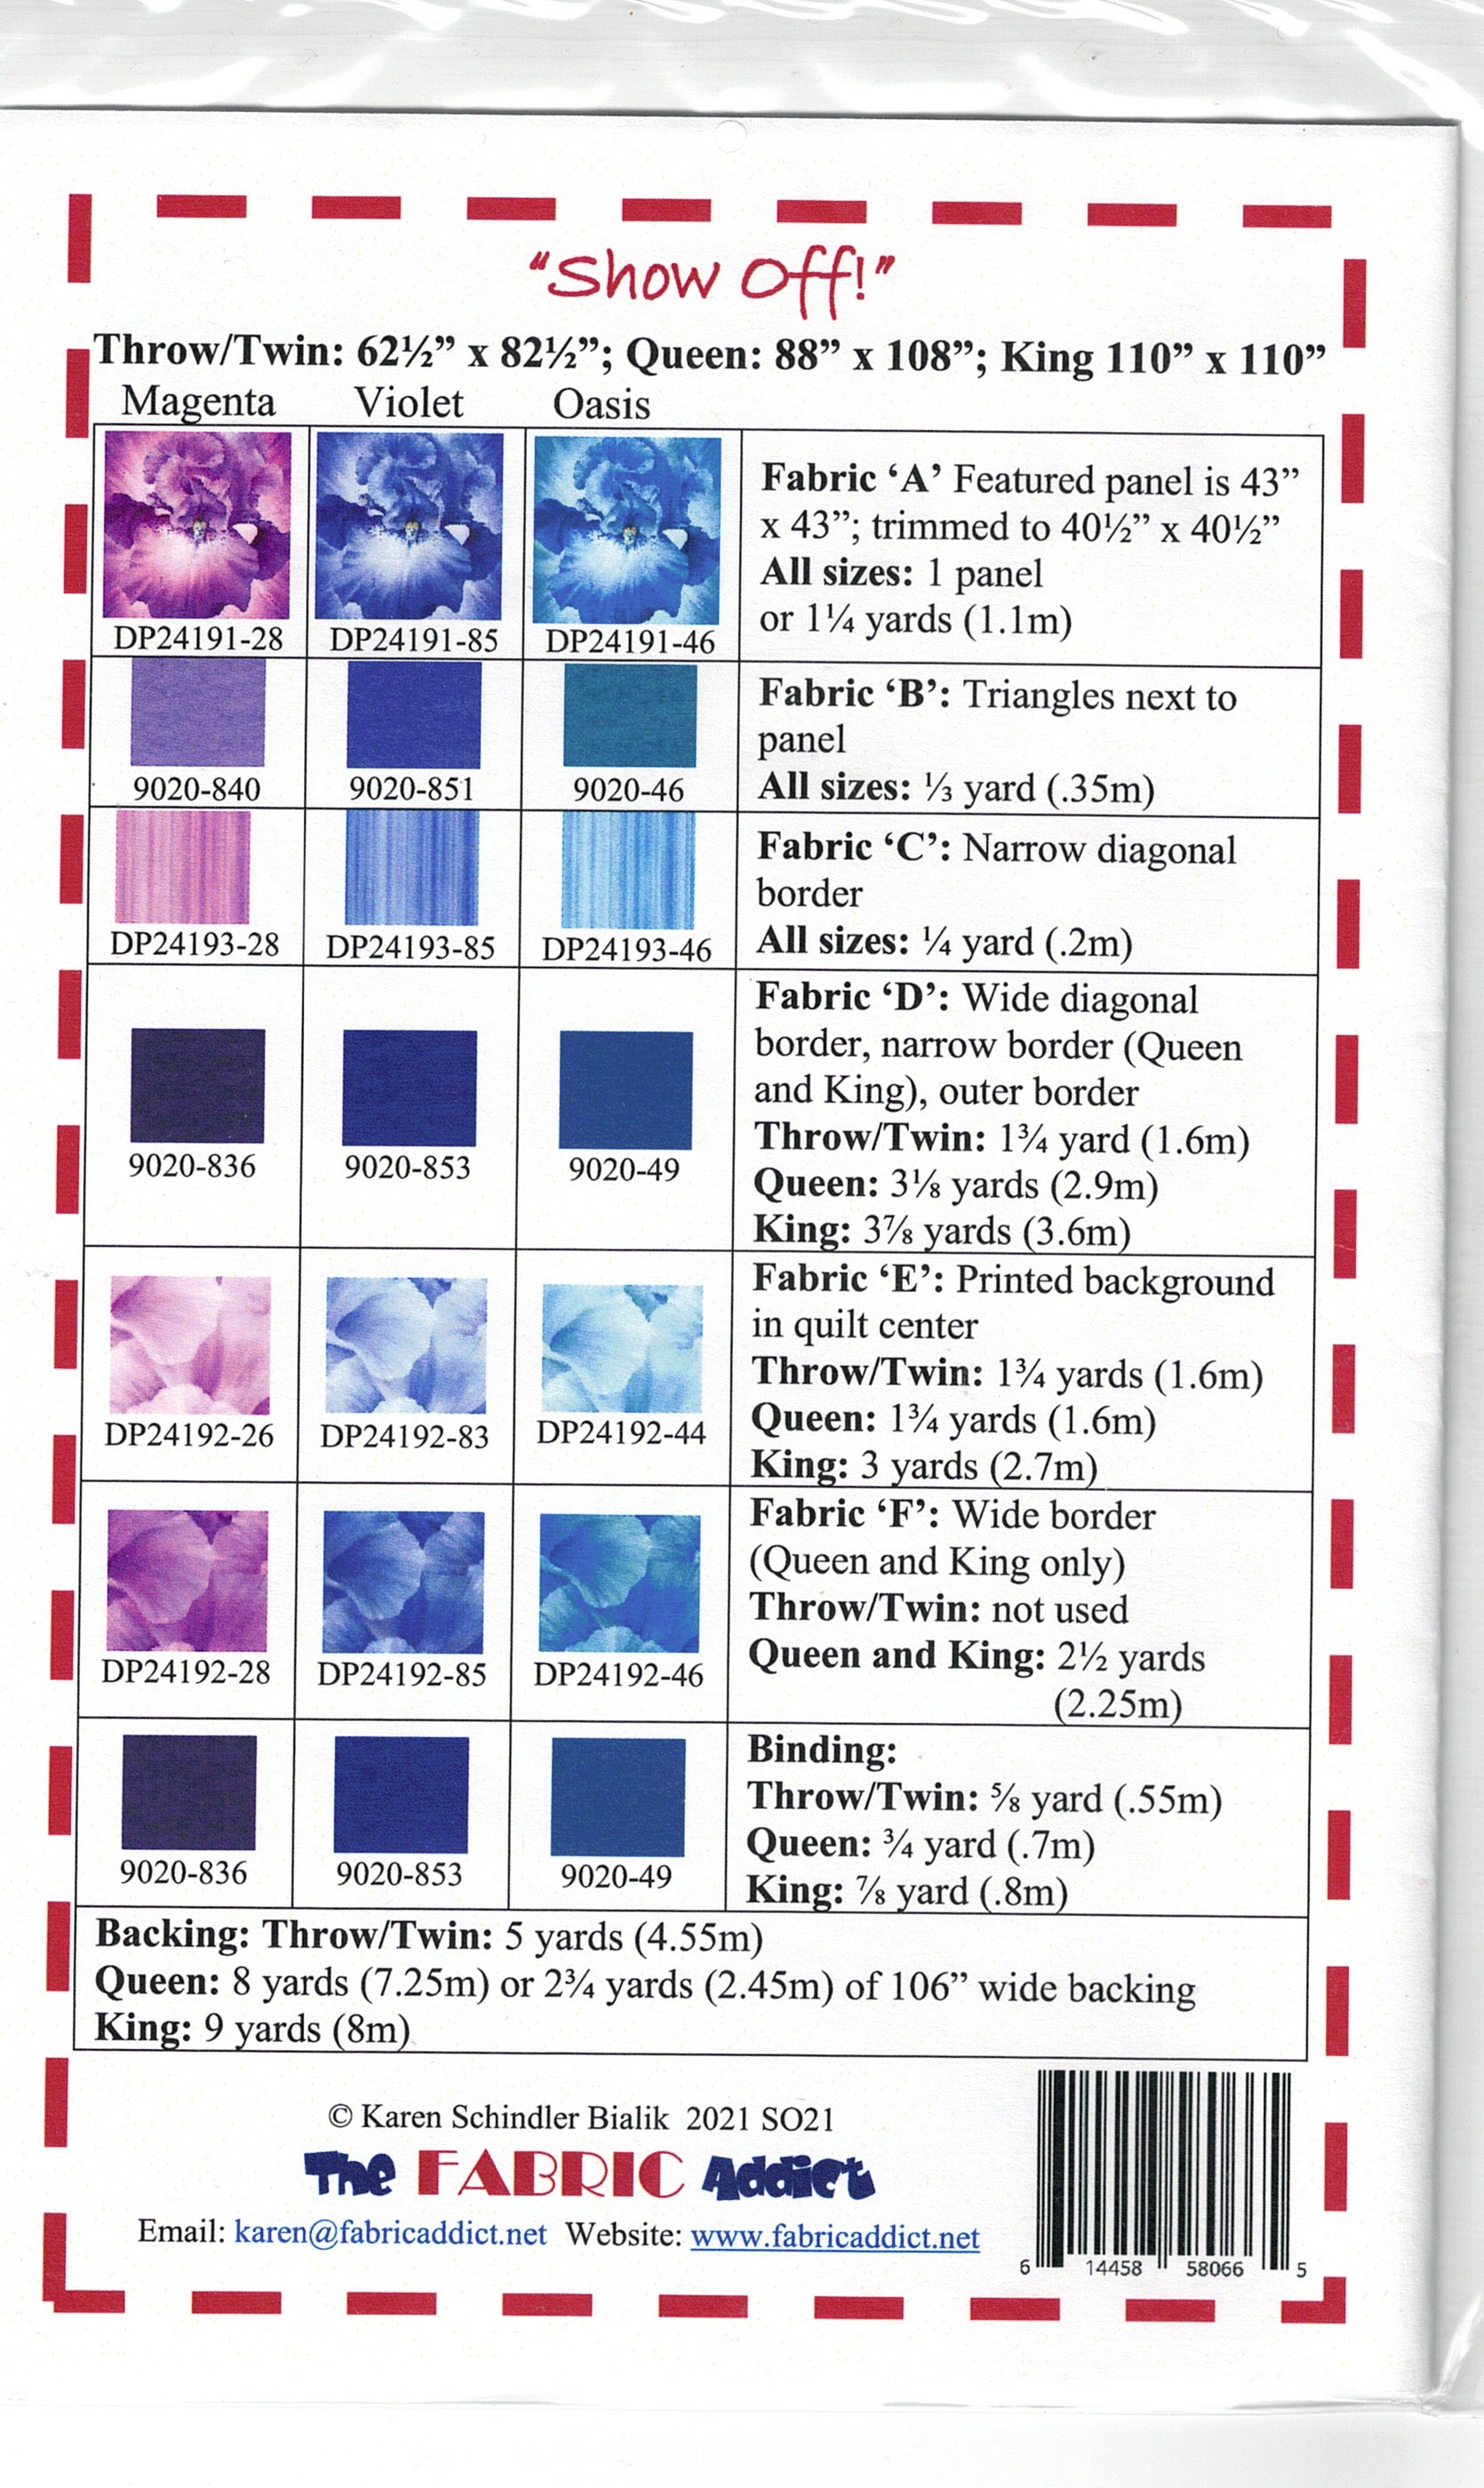 Show Off - Pattern - Twin/Throw & Queen & King Sizes - PTN2803